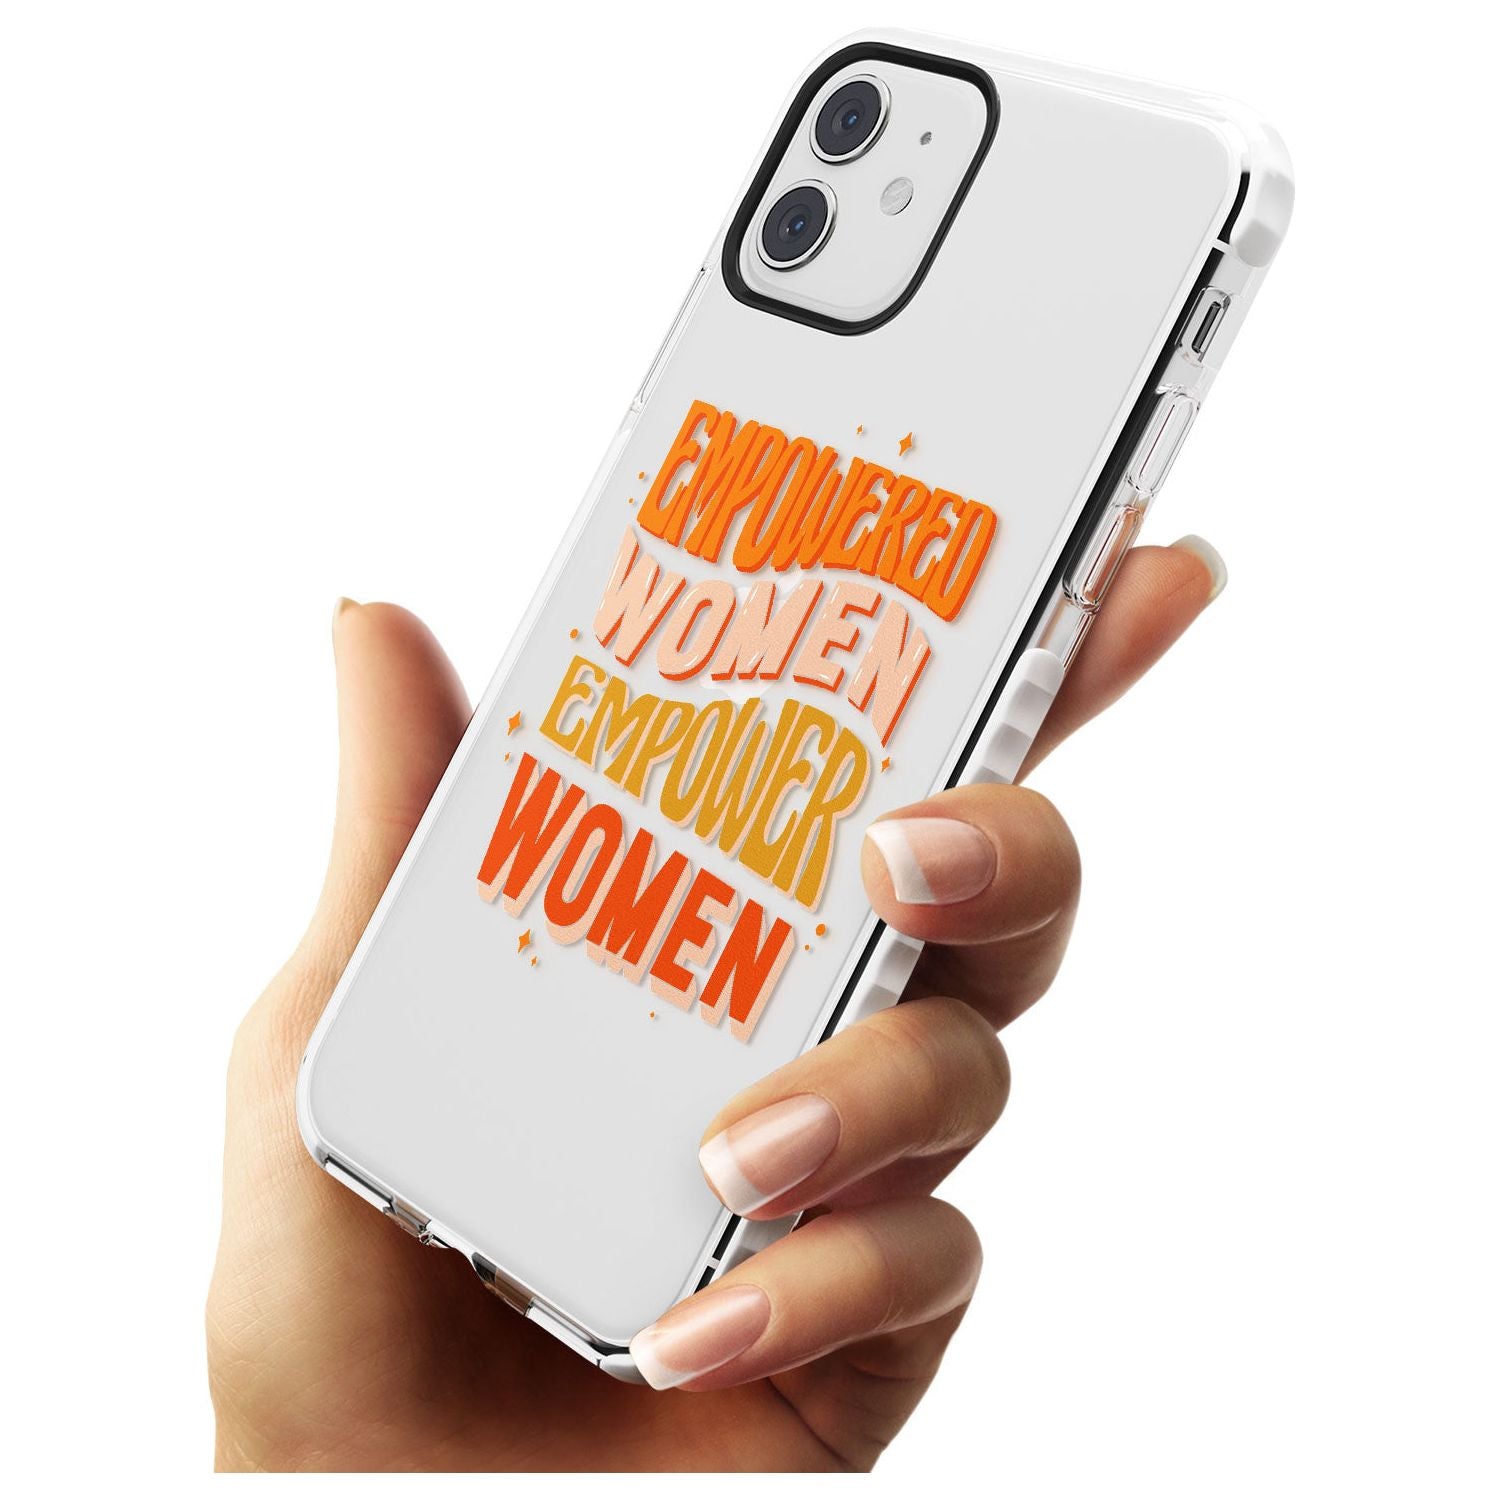 Empowered Women Impact Phone Case for iPhone 11